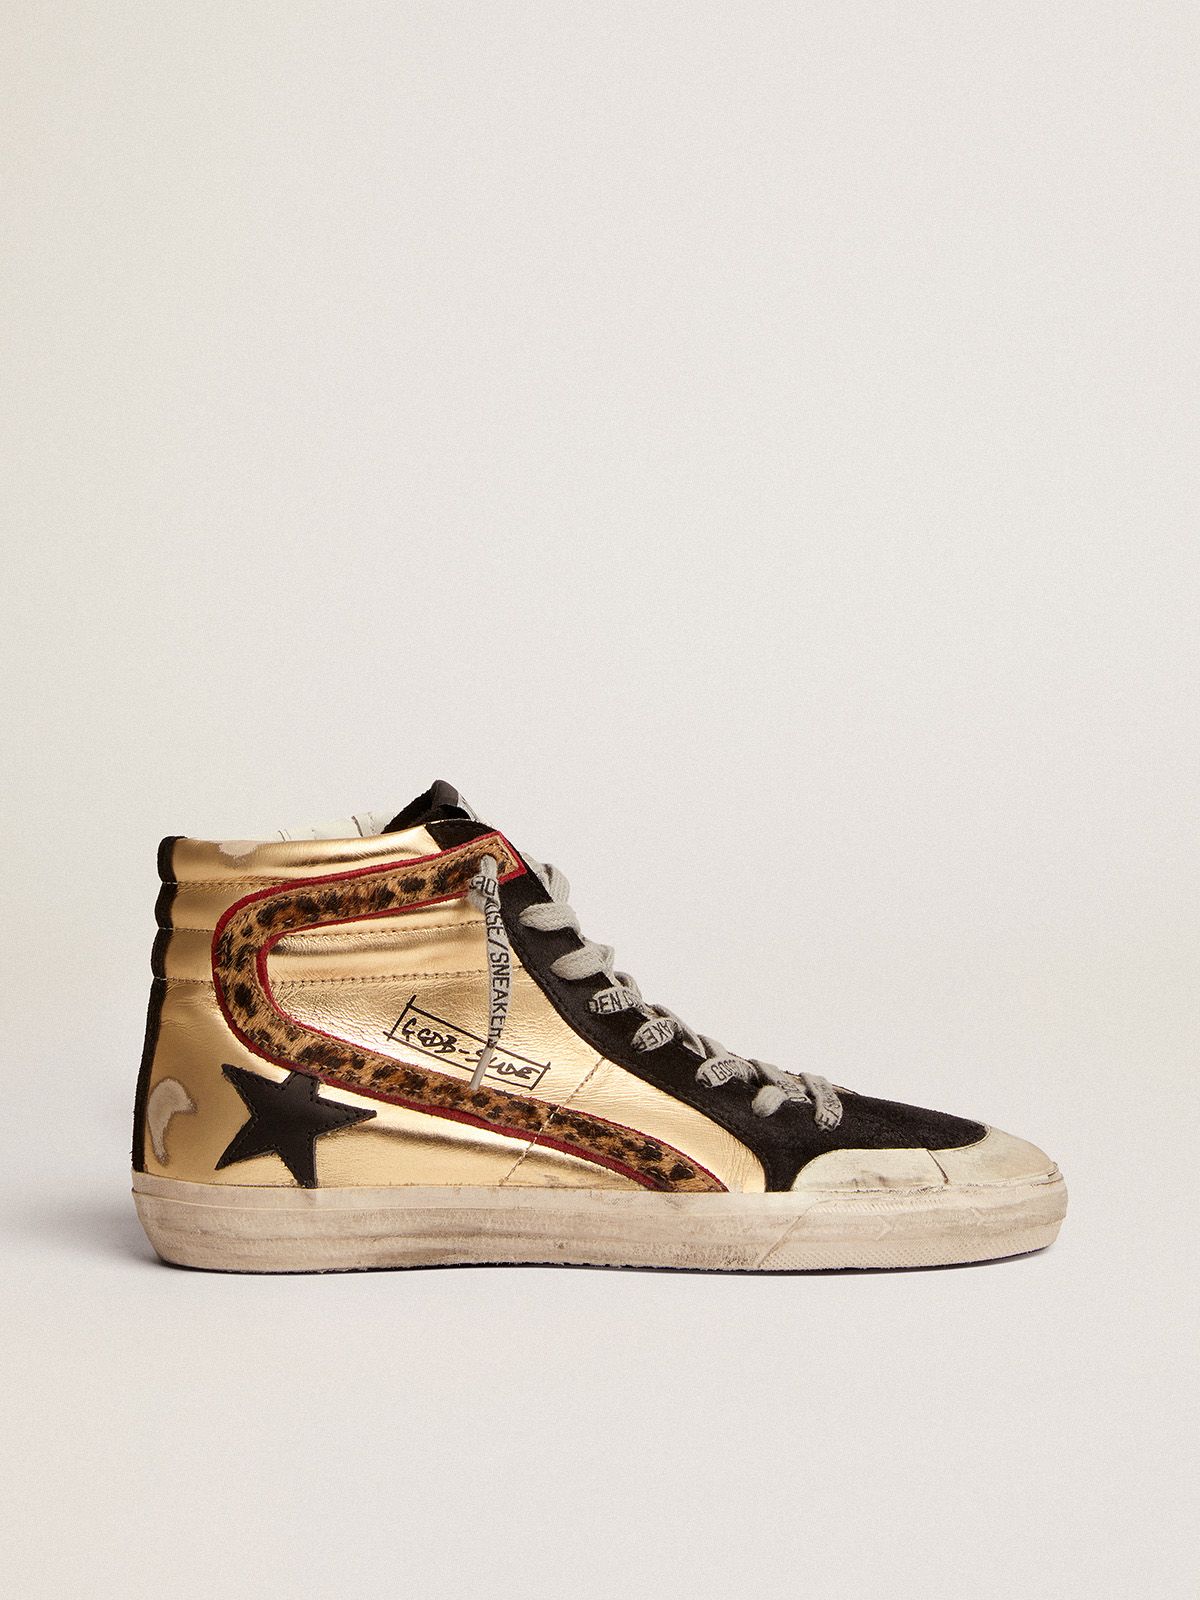 golden goose sneakers pony Slide with gold and black skin leather insert in star Penstar leopard-print